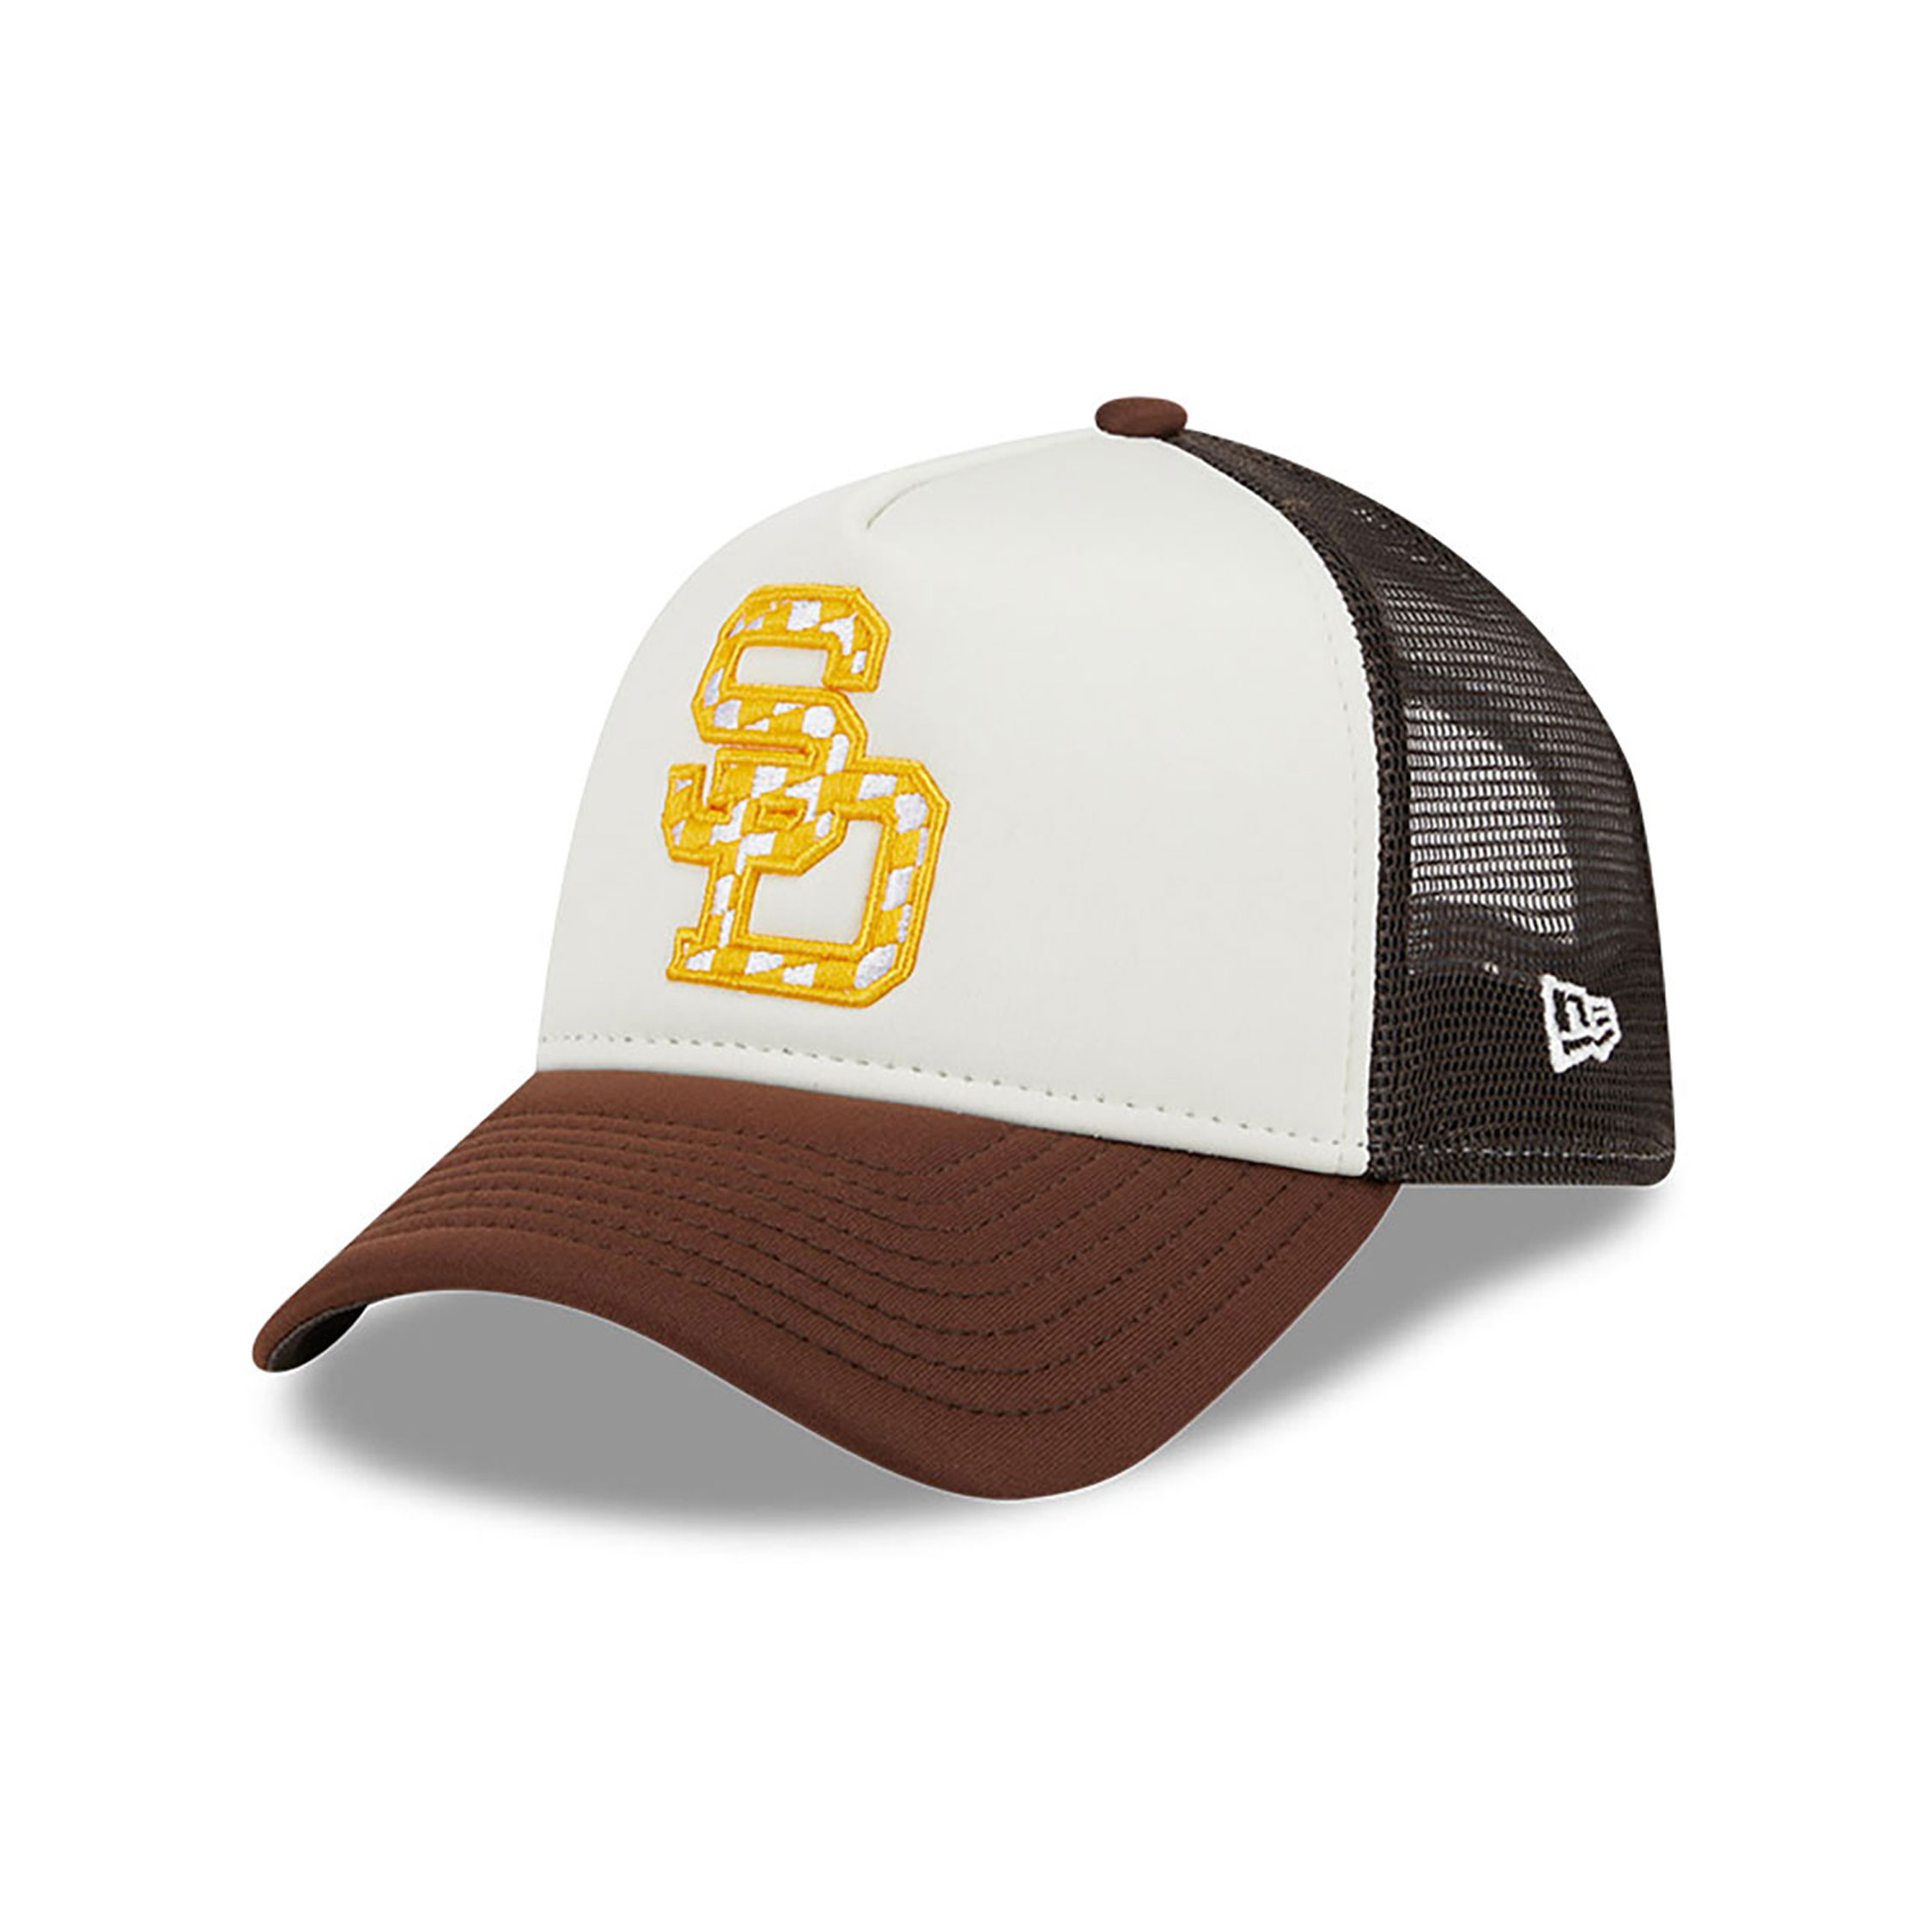 San Diego Padres Check Flag Brown 9FORTY A-Frame Adjustable Trucker Cap